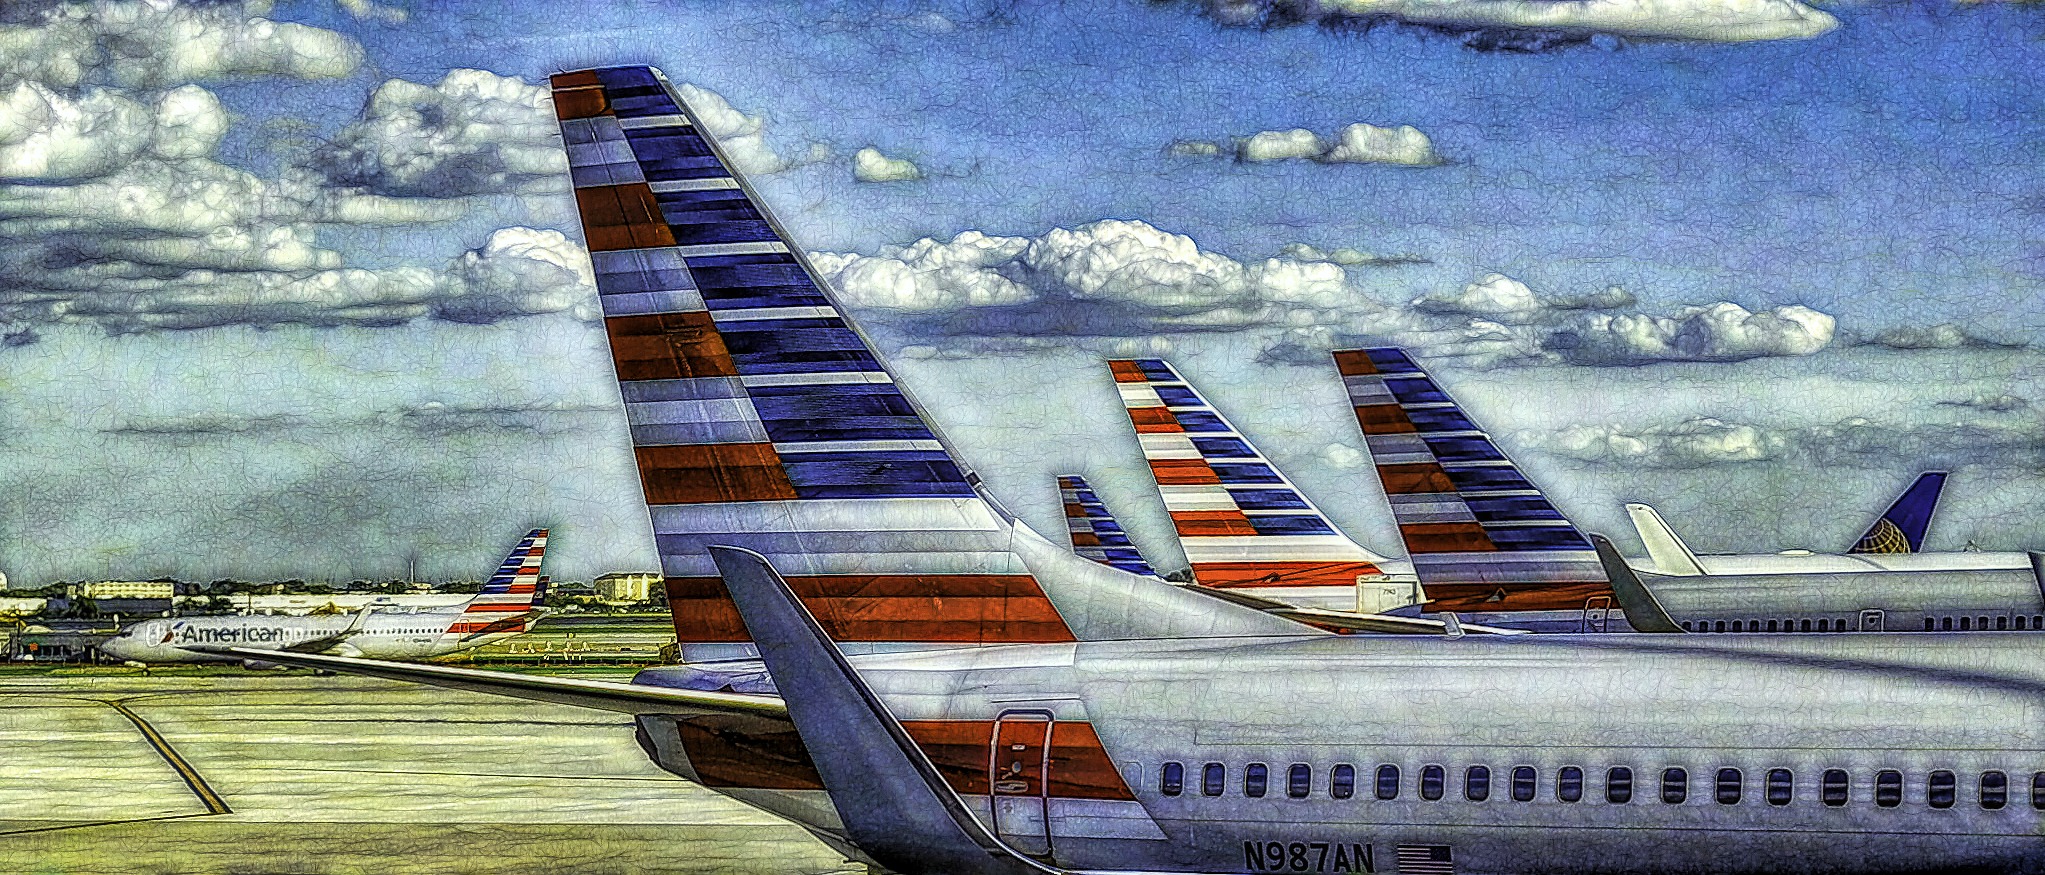 American Airlines Planes lined up in Chicago, Illinois.